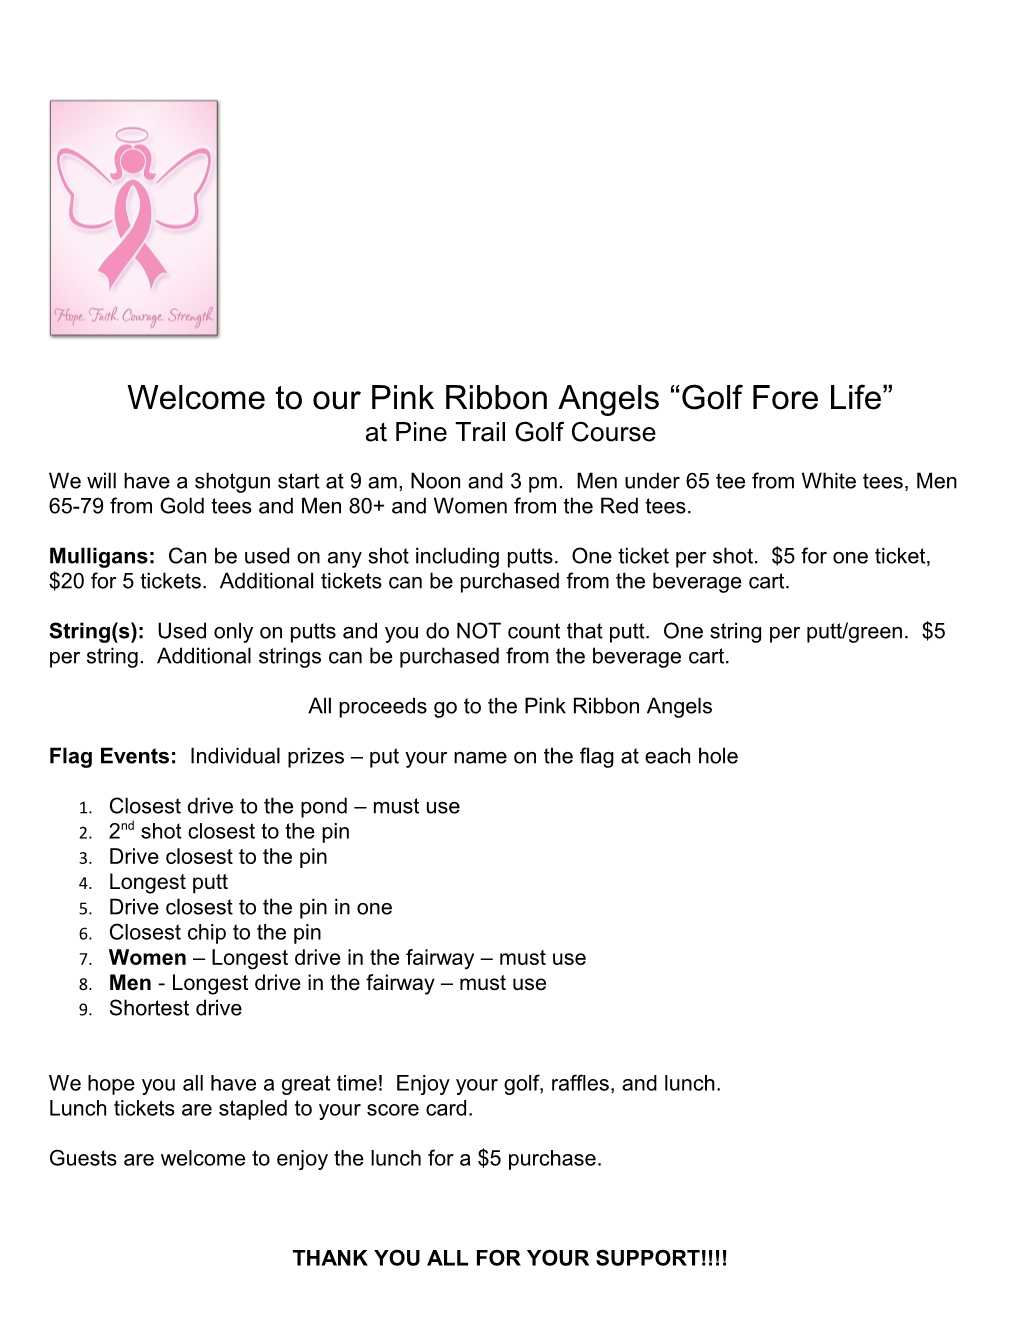 Welcome to Our Pink Ribbon Angels Golf Fore Life